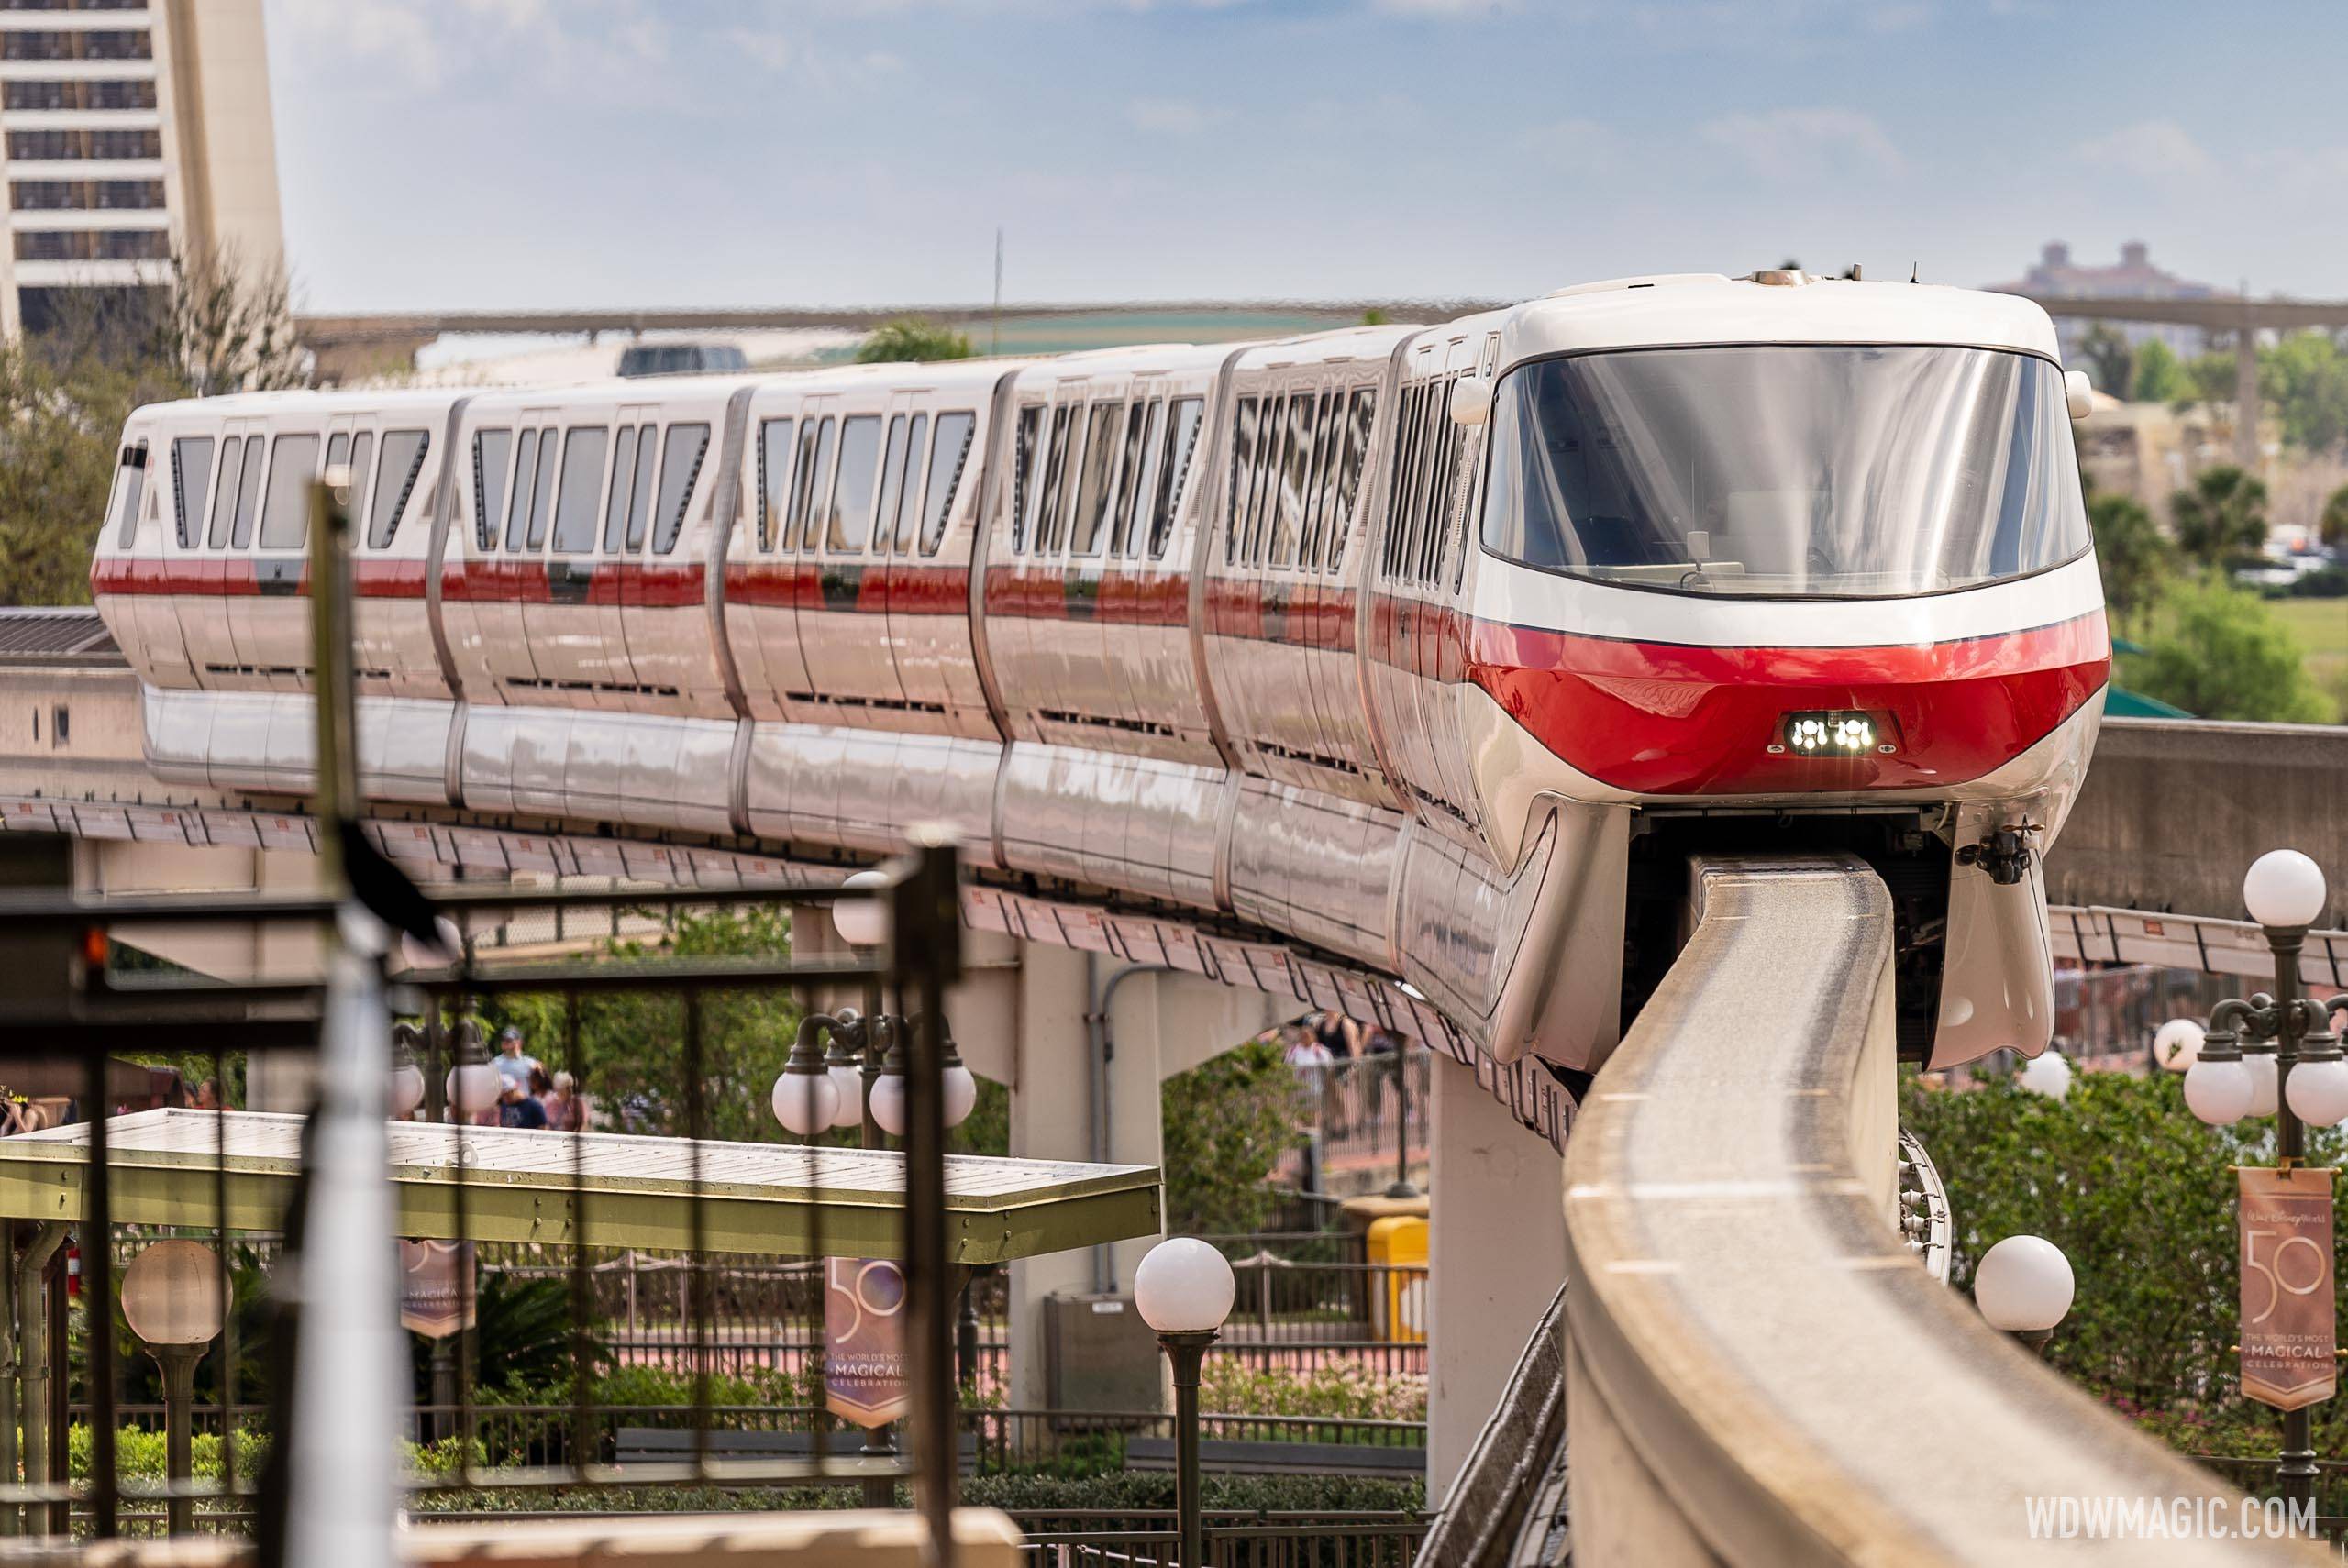 Monorails suffering extended outage